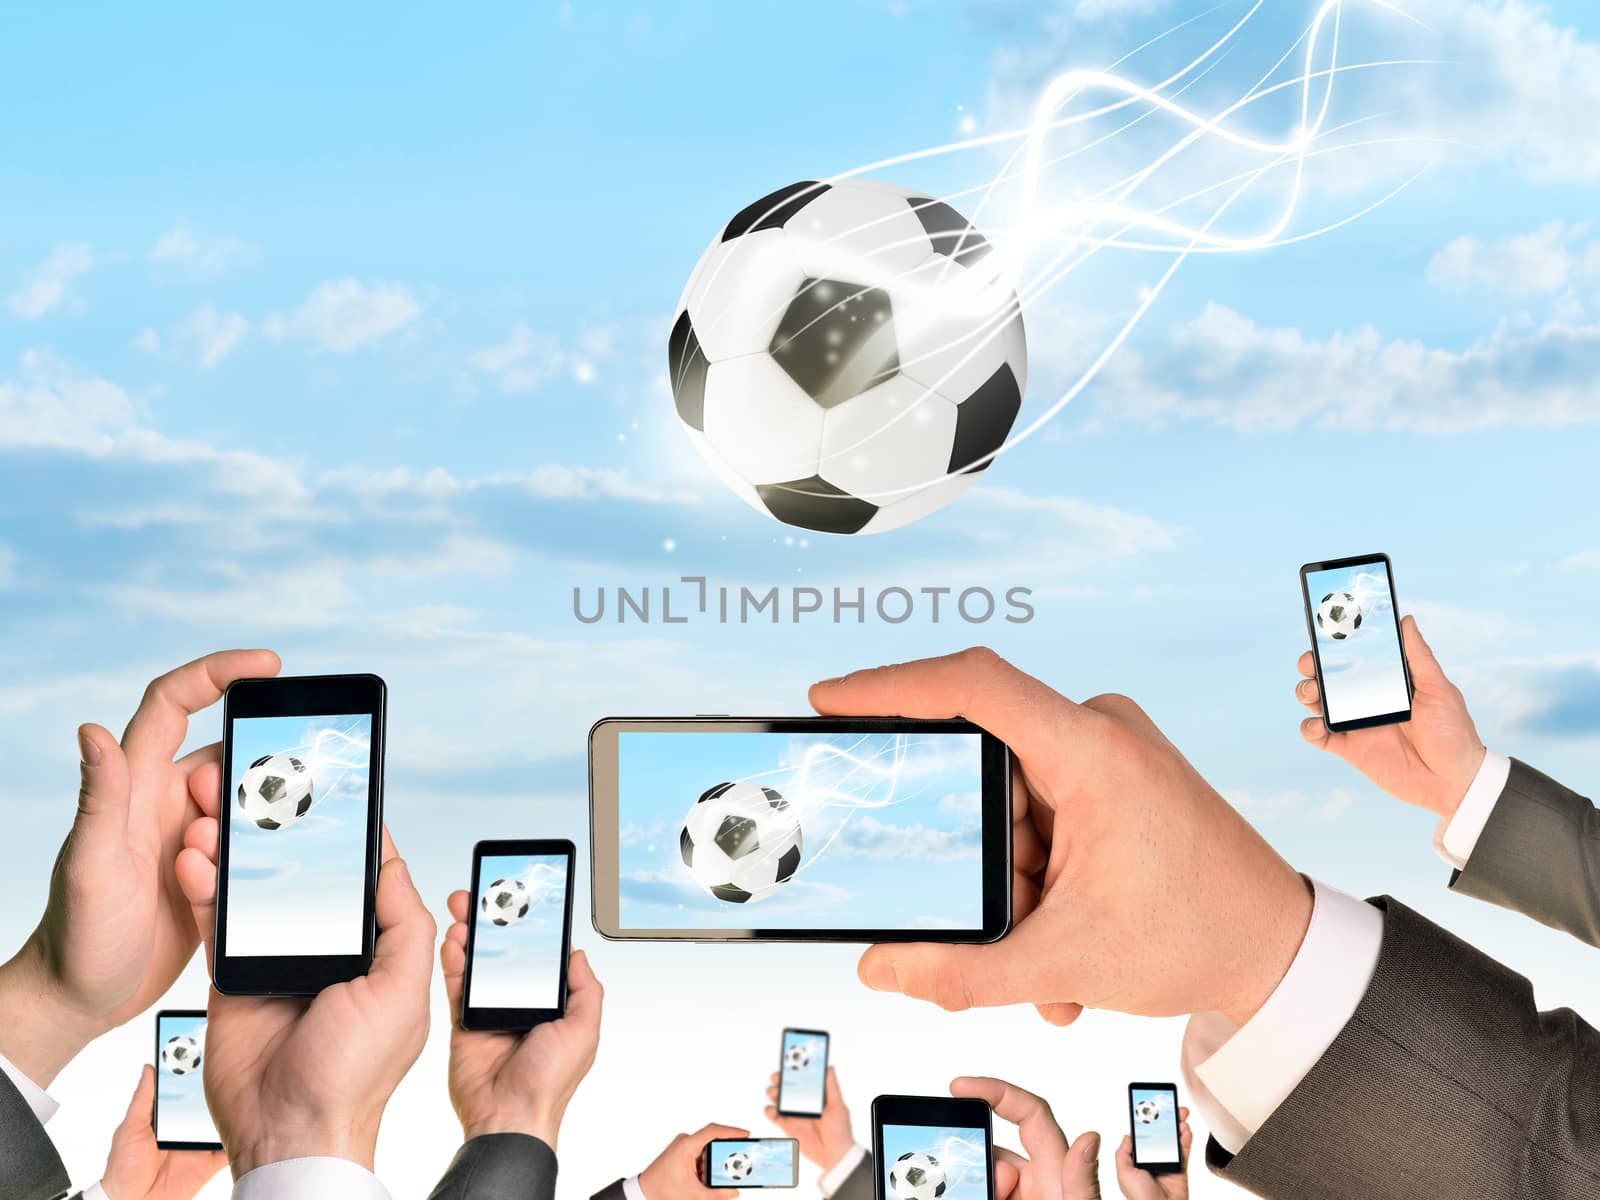 Hands holding smart phones and shoot video as falling soccer ball. Sky with clouds on background